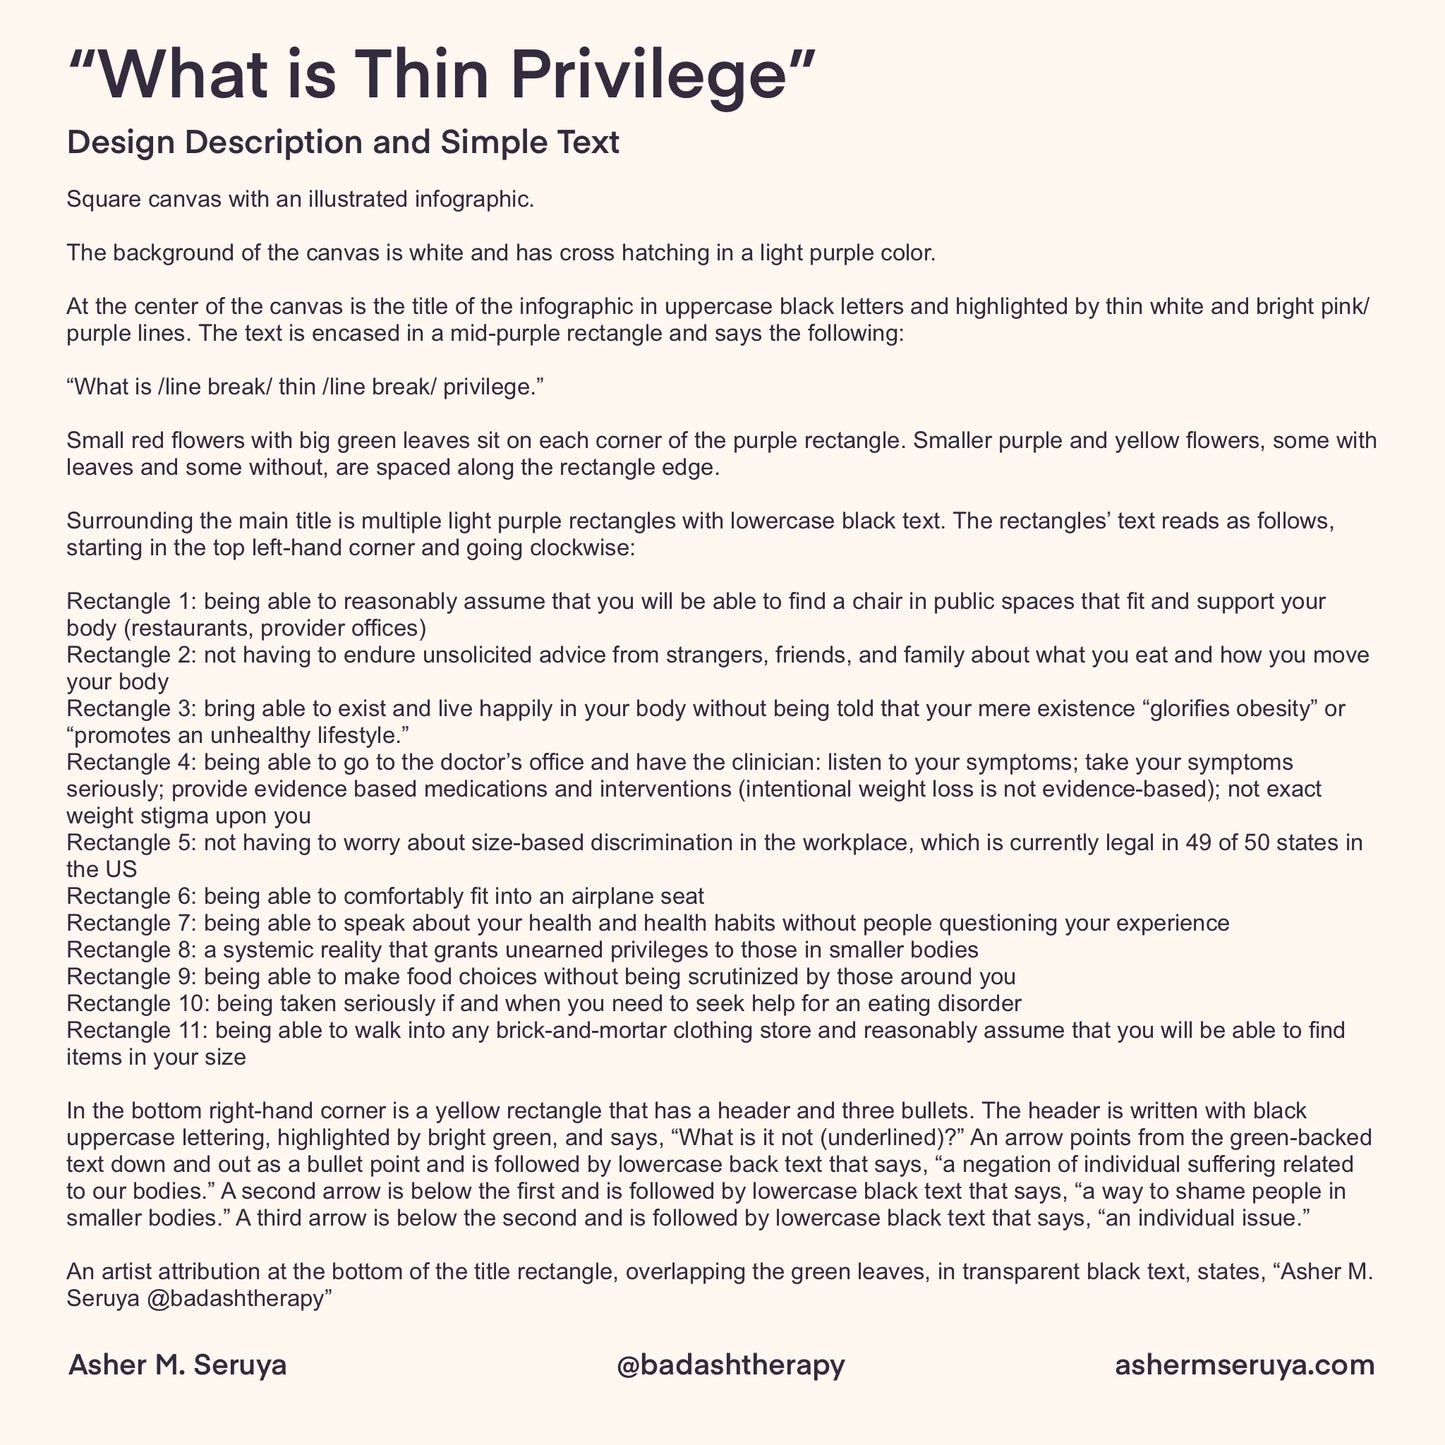 What is Thin Privilege - Illustrated Infographic